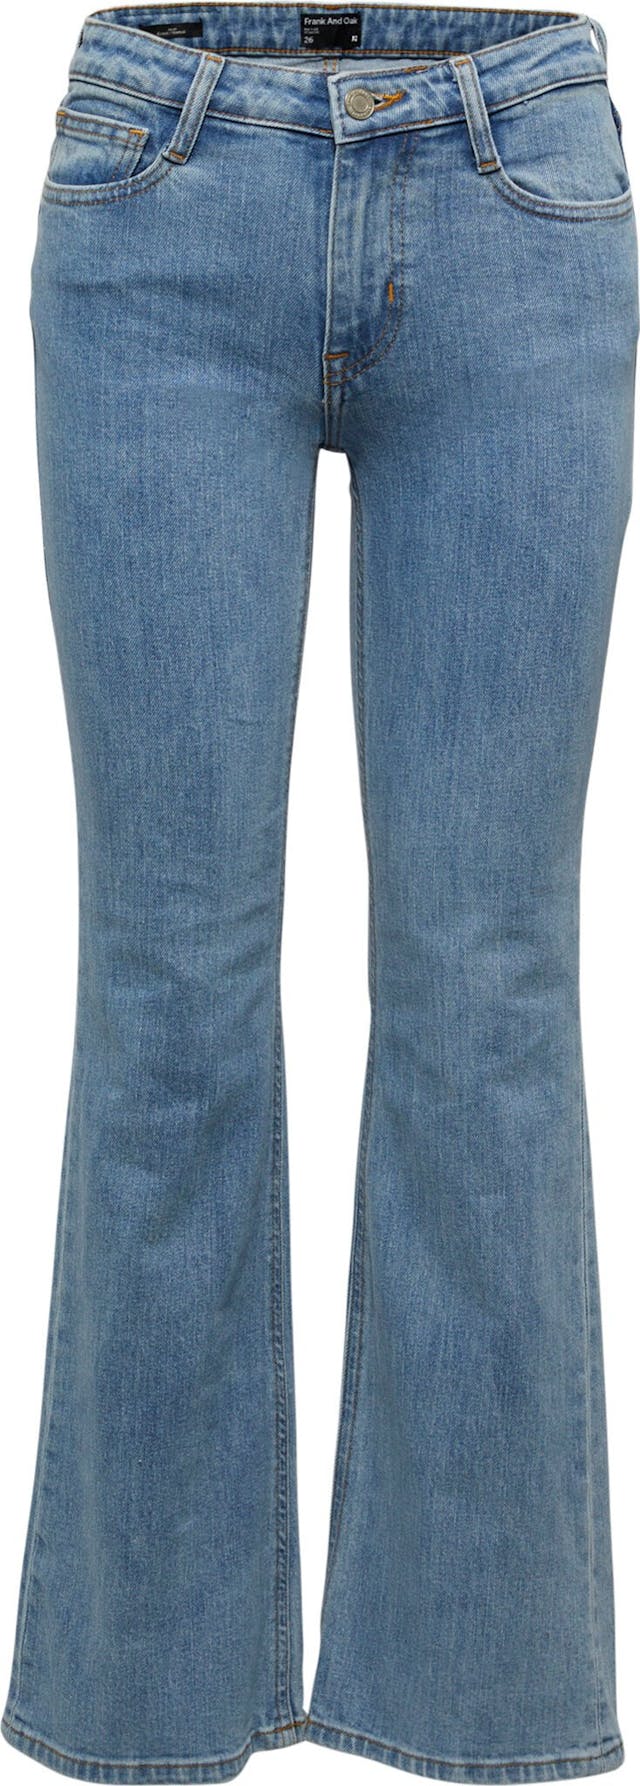 Product image for The Joan Mid Rise Bootcut Jean - Women's